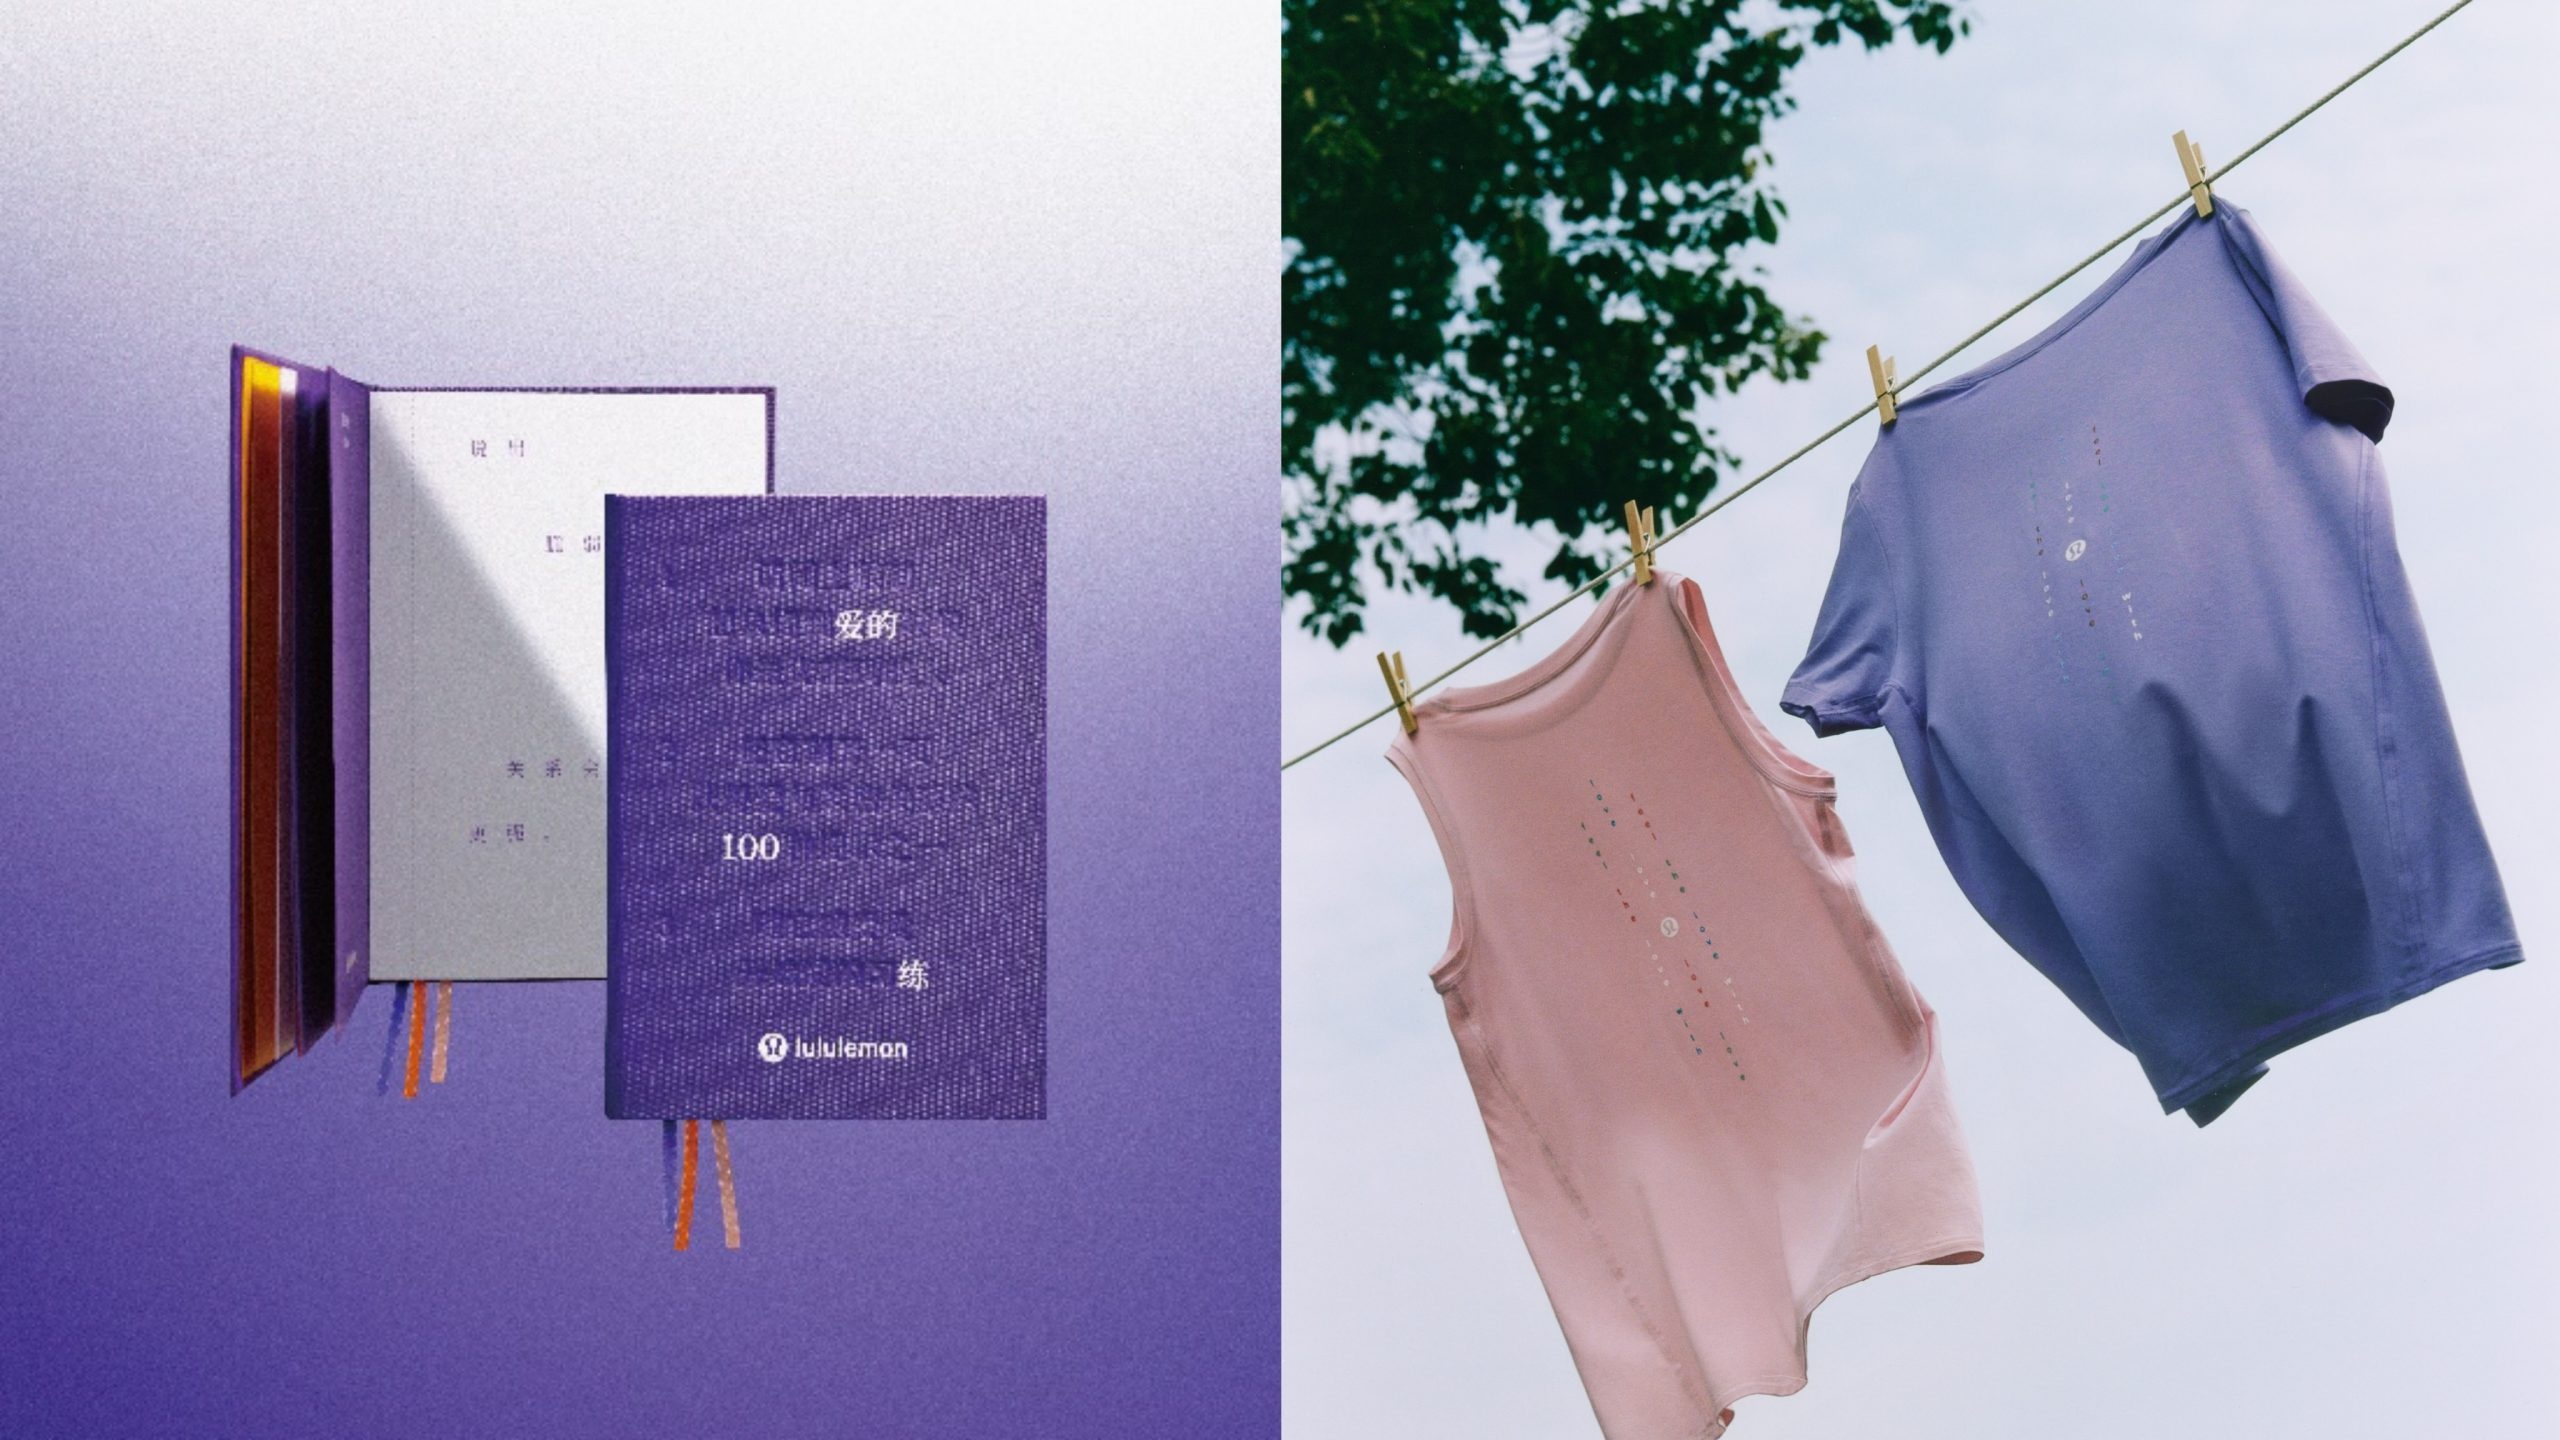 Lululemon has launched a Qixi-exclusive capsule collection and a dedicated brochure. Photo: Lululemon